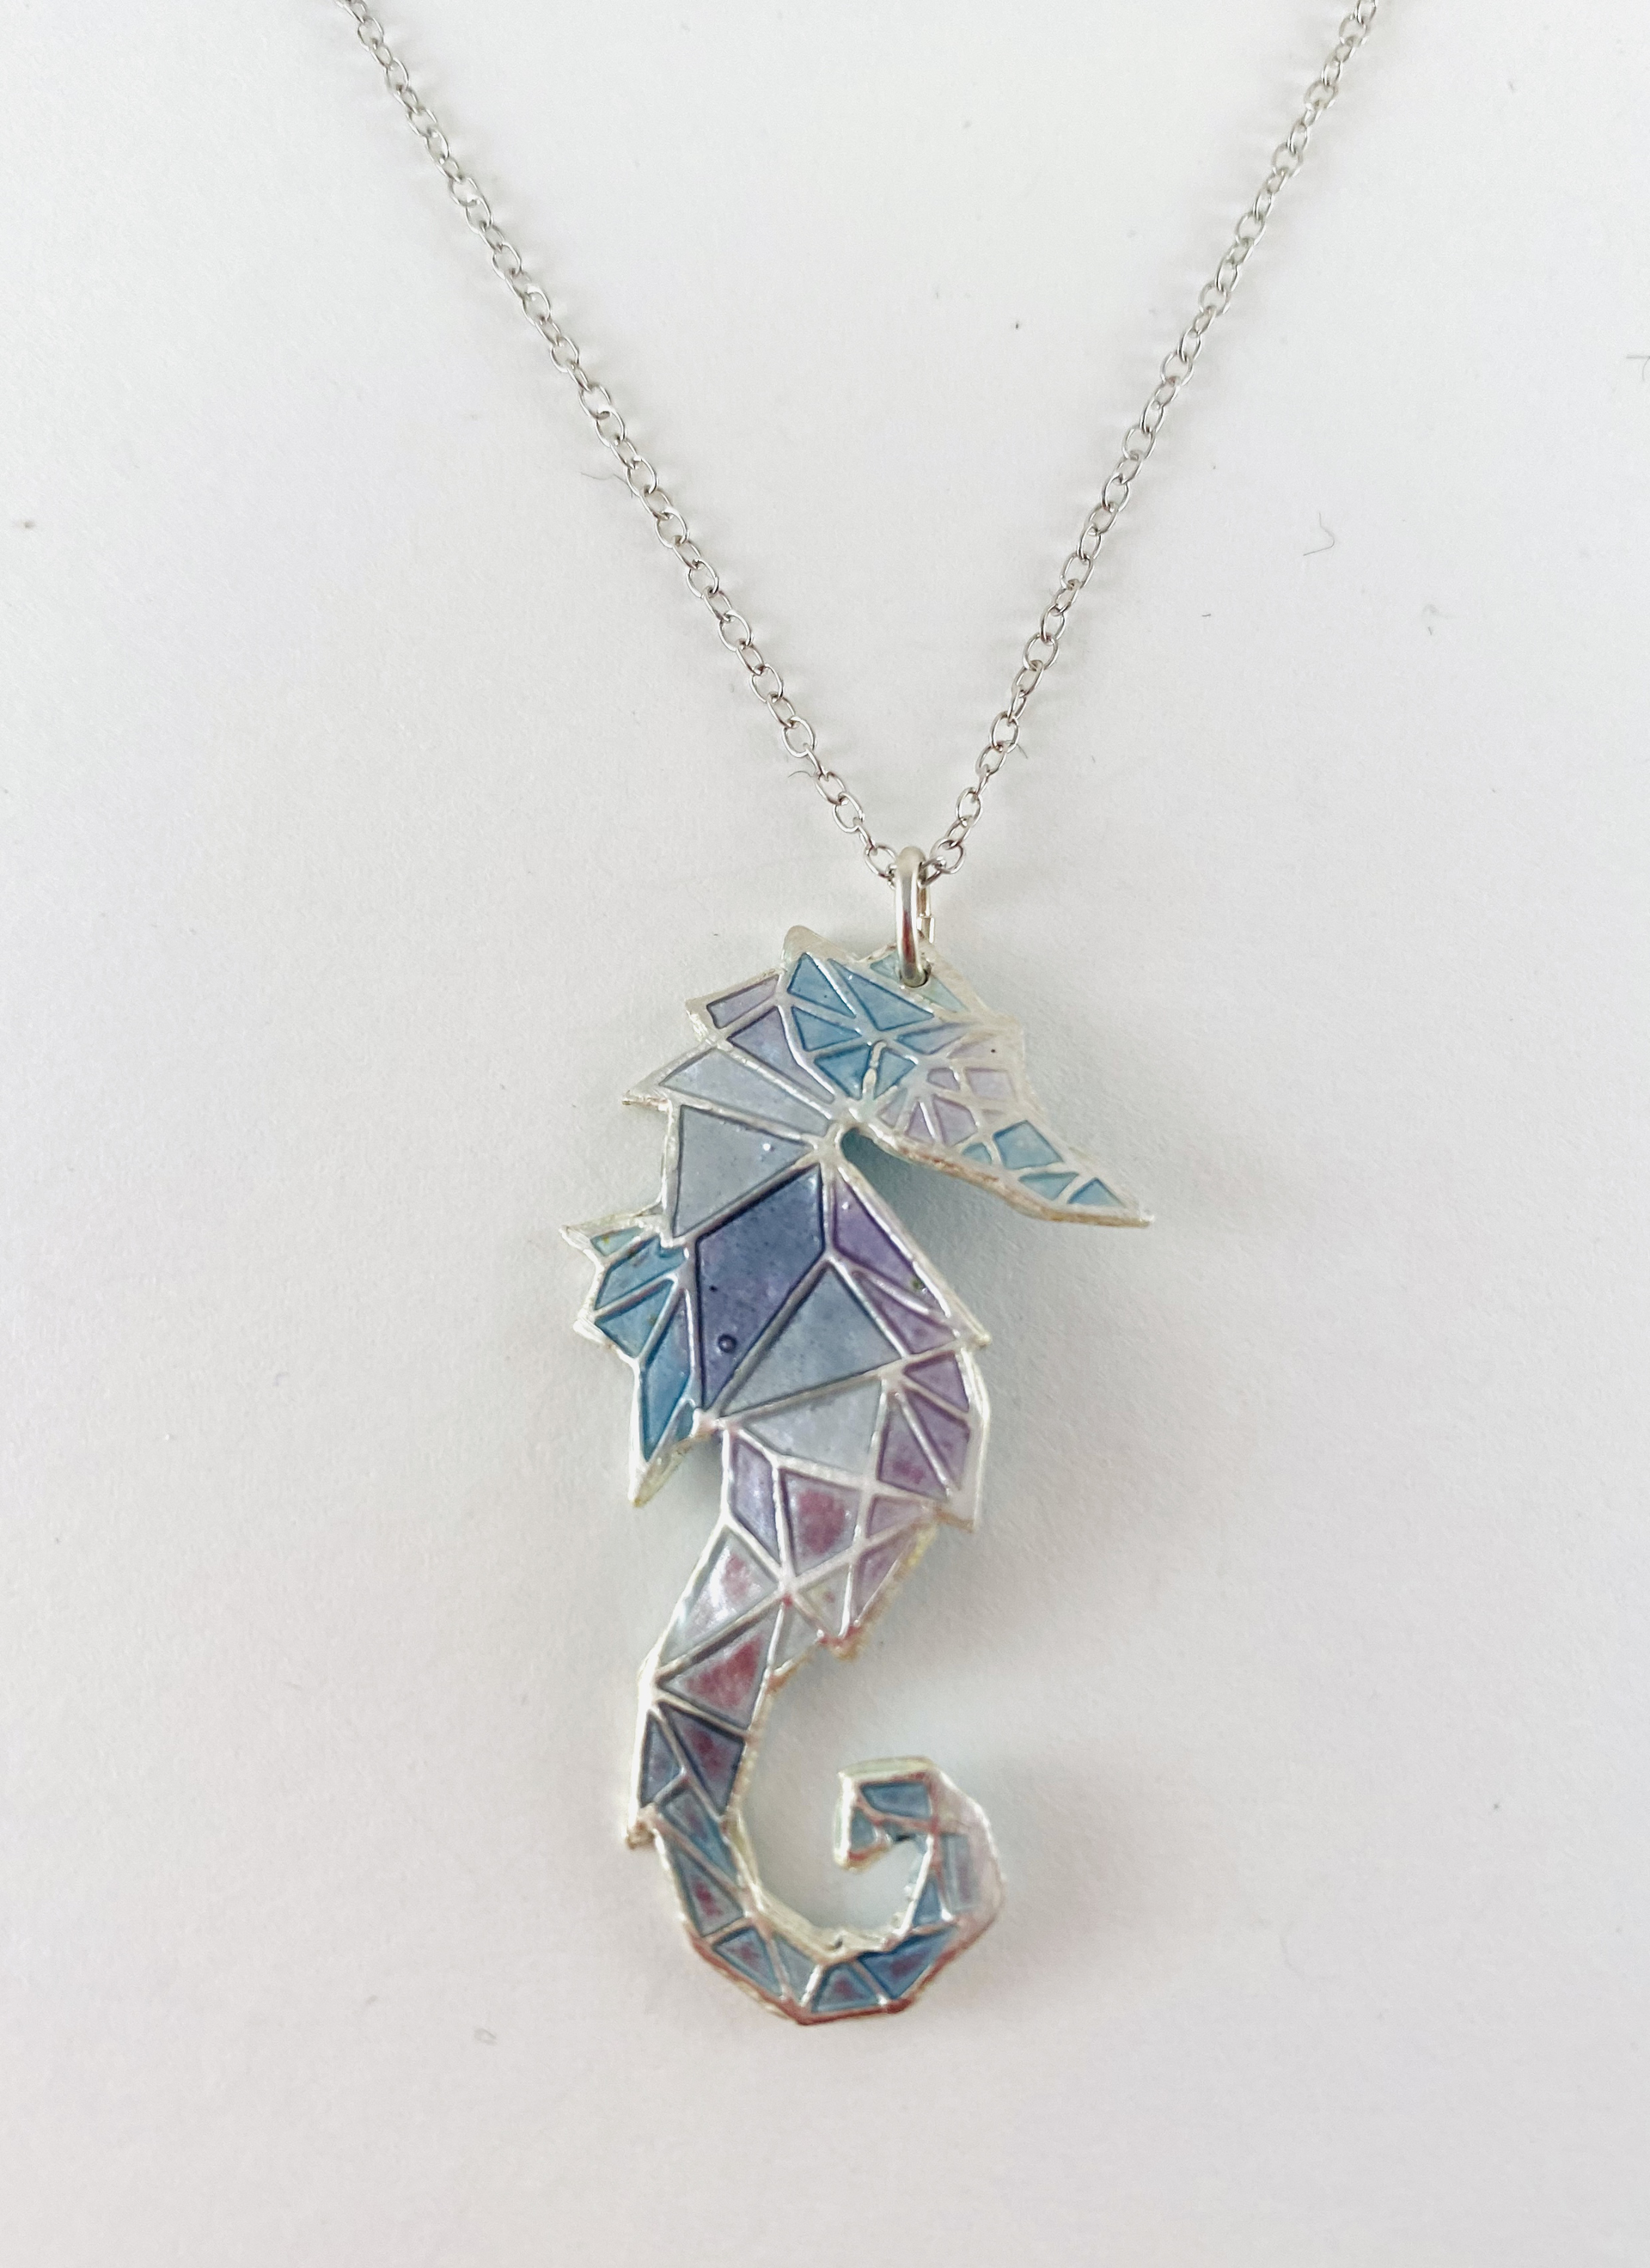 Champleve Sea Horse Pendant, 18" Silver Chain by Karen Hakim